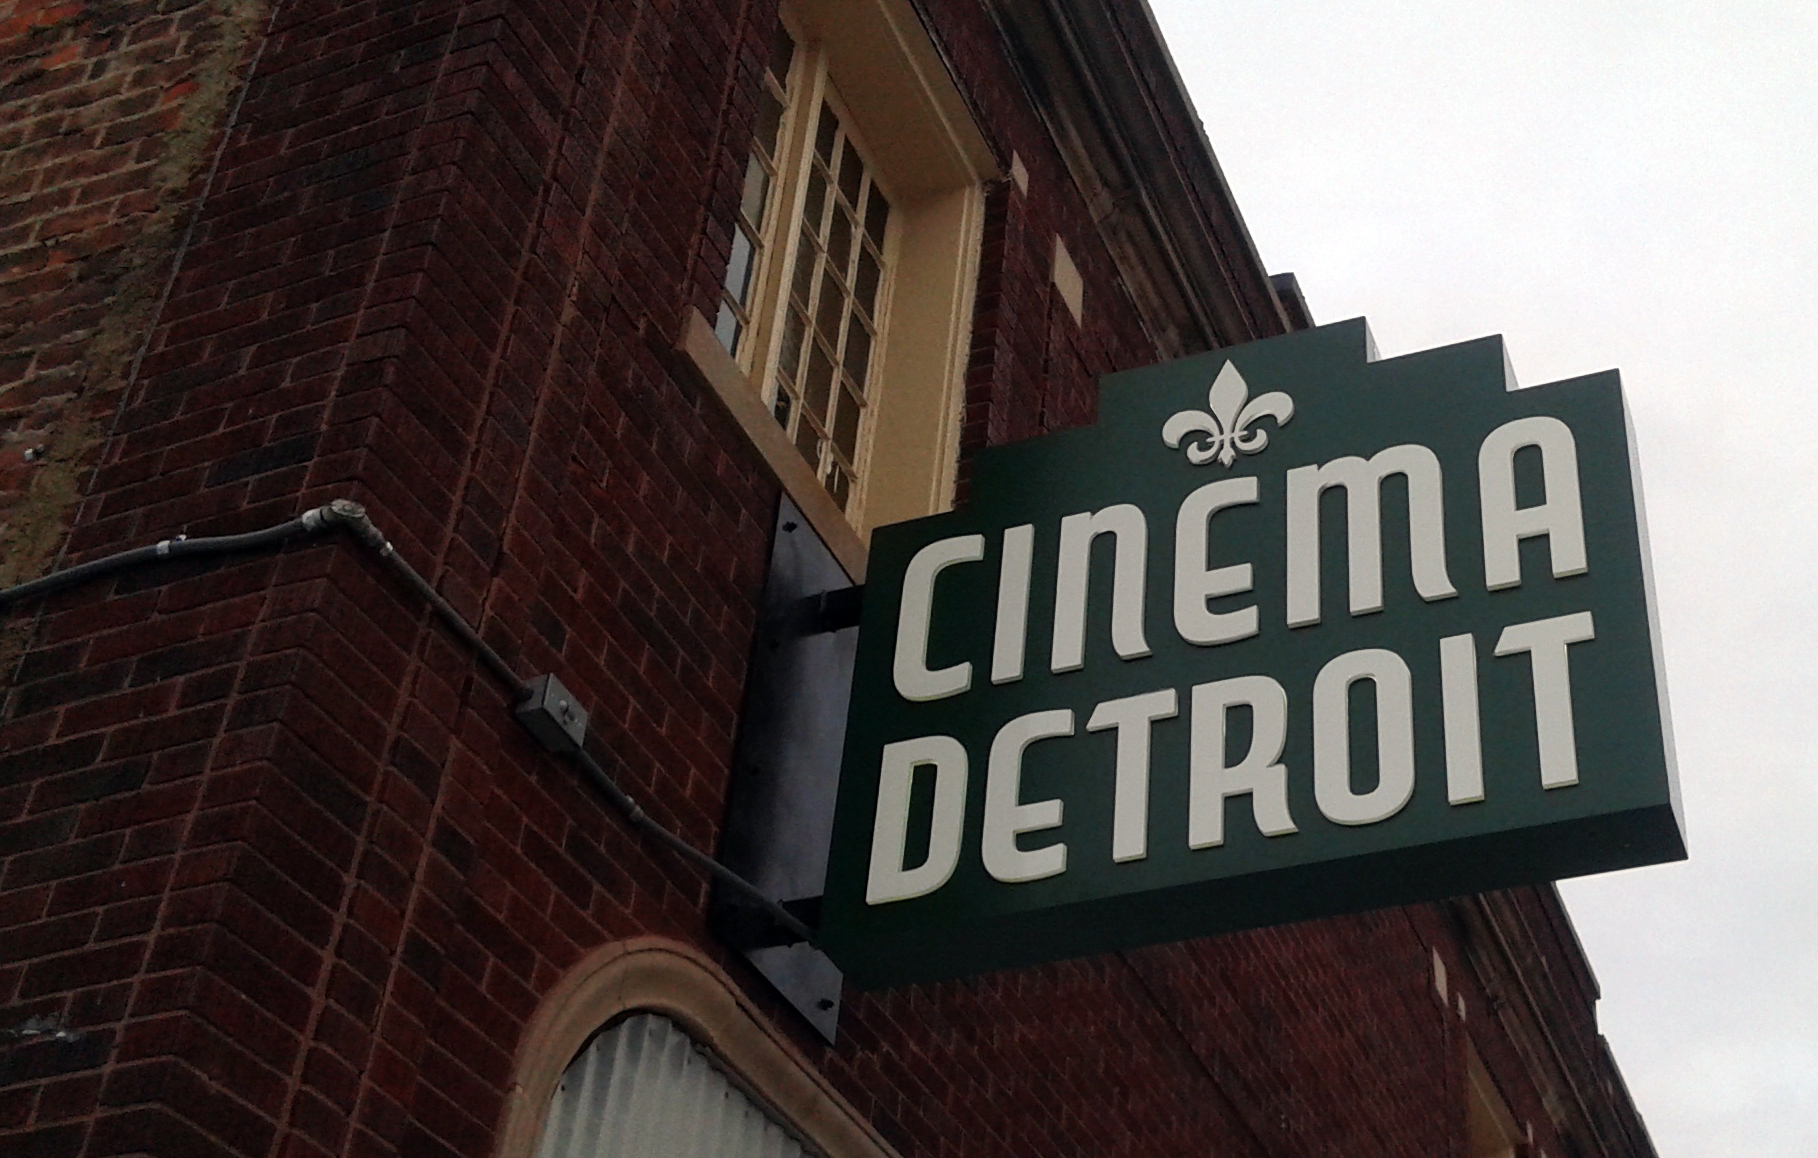 A building made from red brick holds the sign for Cinema Detroit. Their sign has a fleur-de-lis at the top.